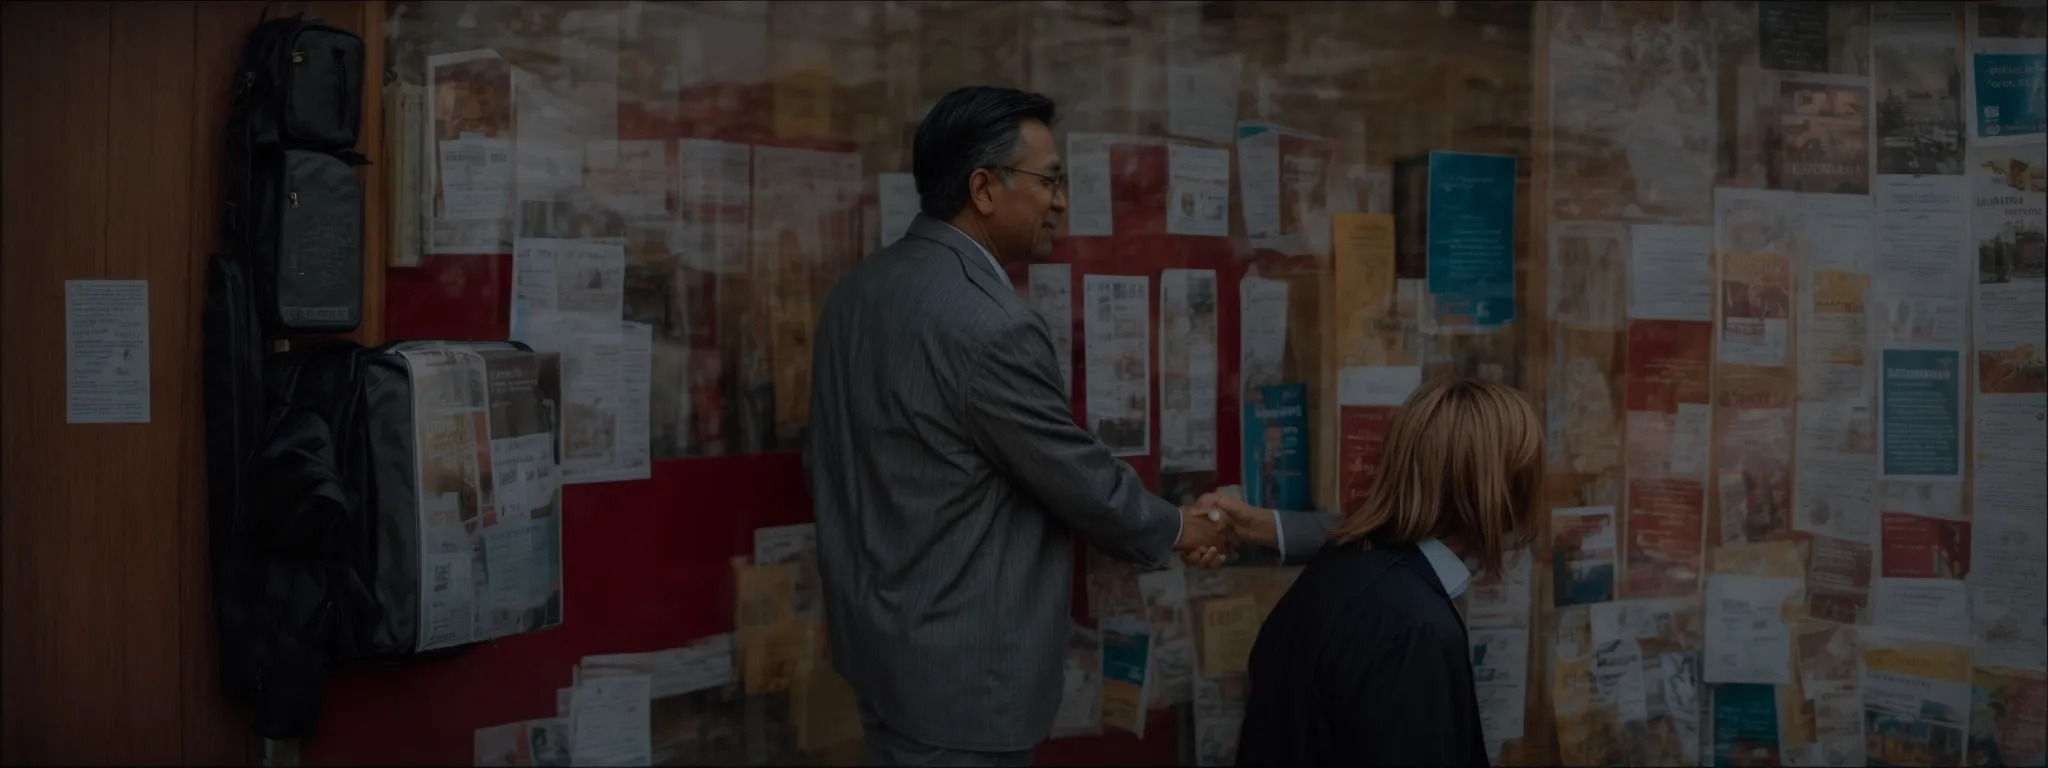 a businessperson shakes hands with a local shop owner in front of a flyer-covered community bulletin board.